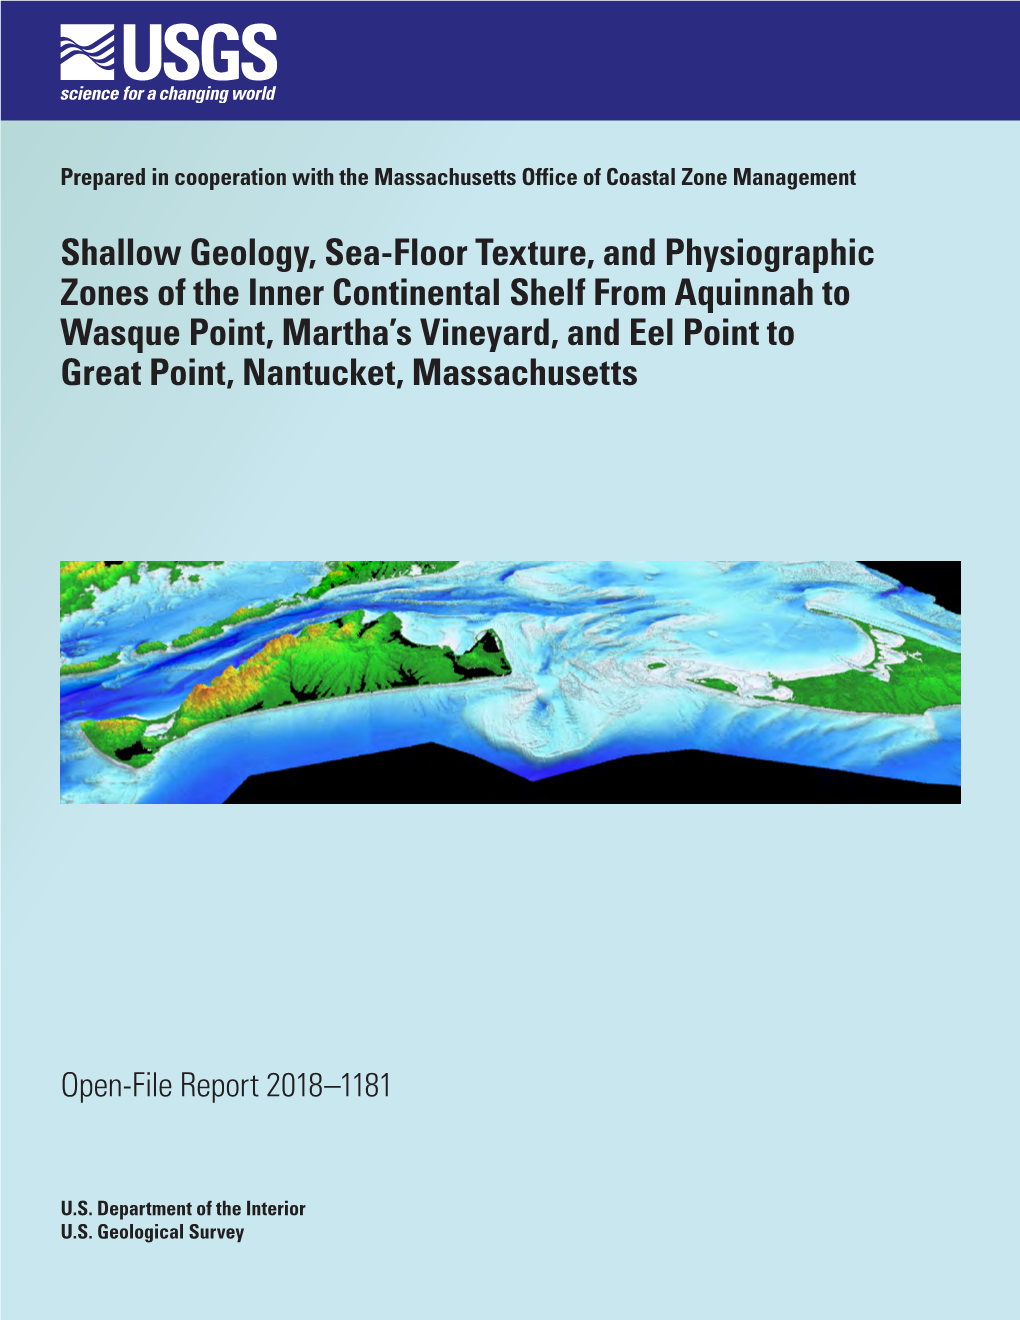 Shallow Geology, Sea-Floor Texture, and Physiographic